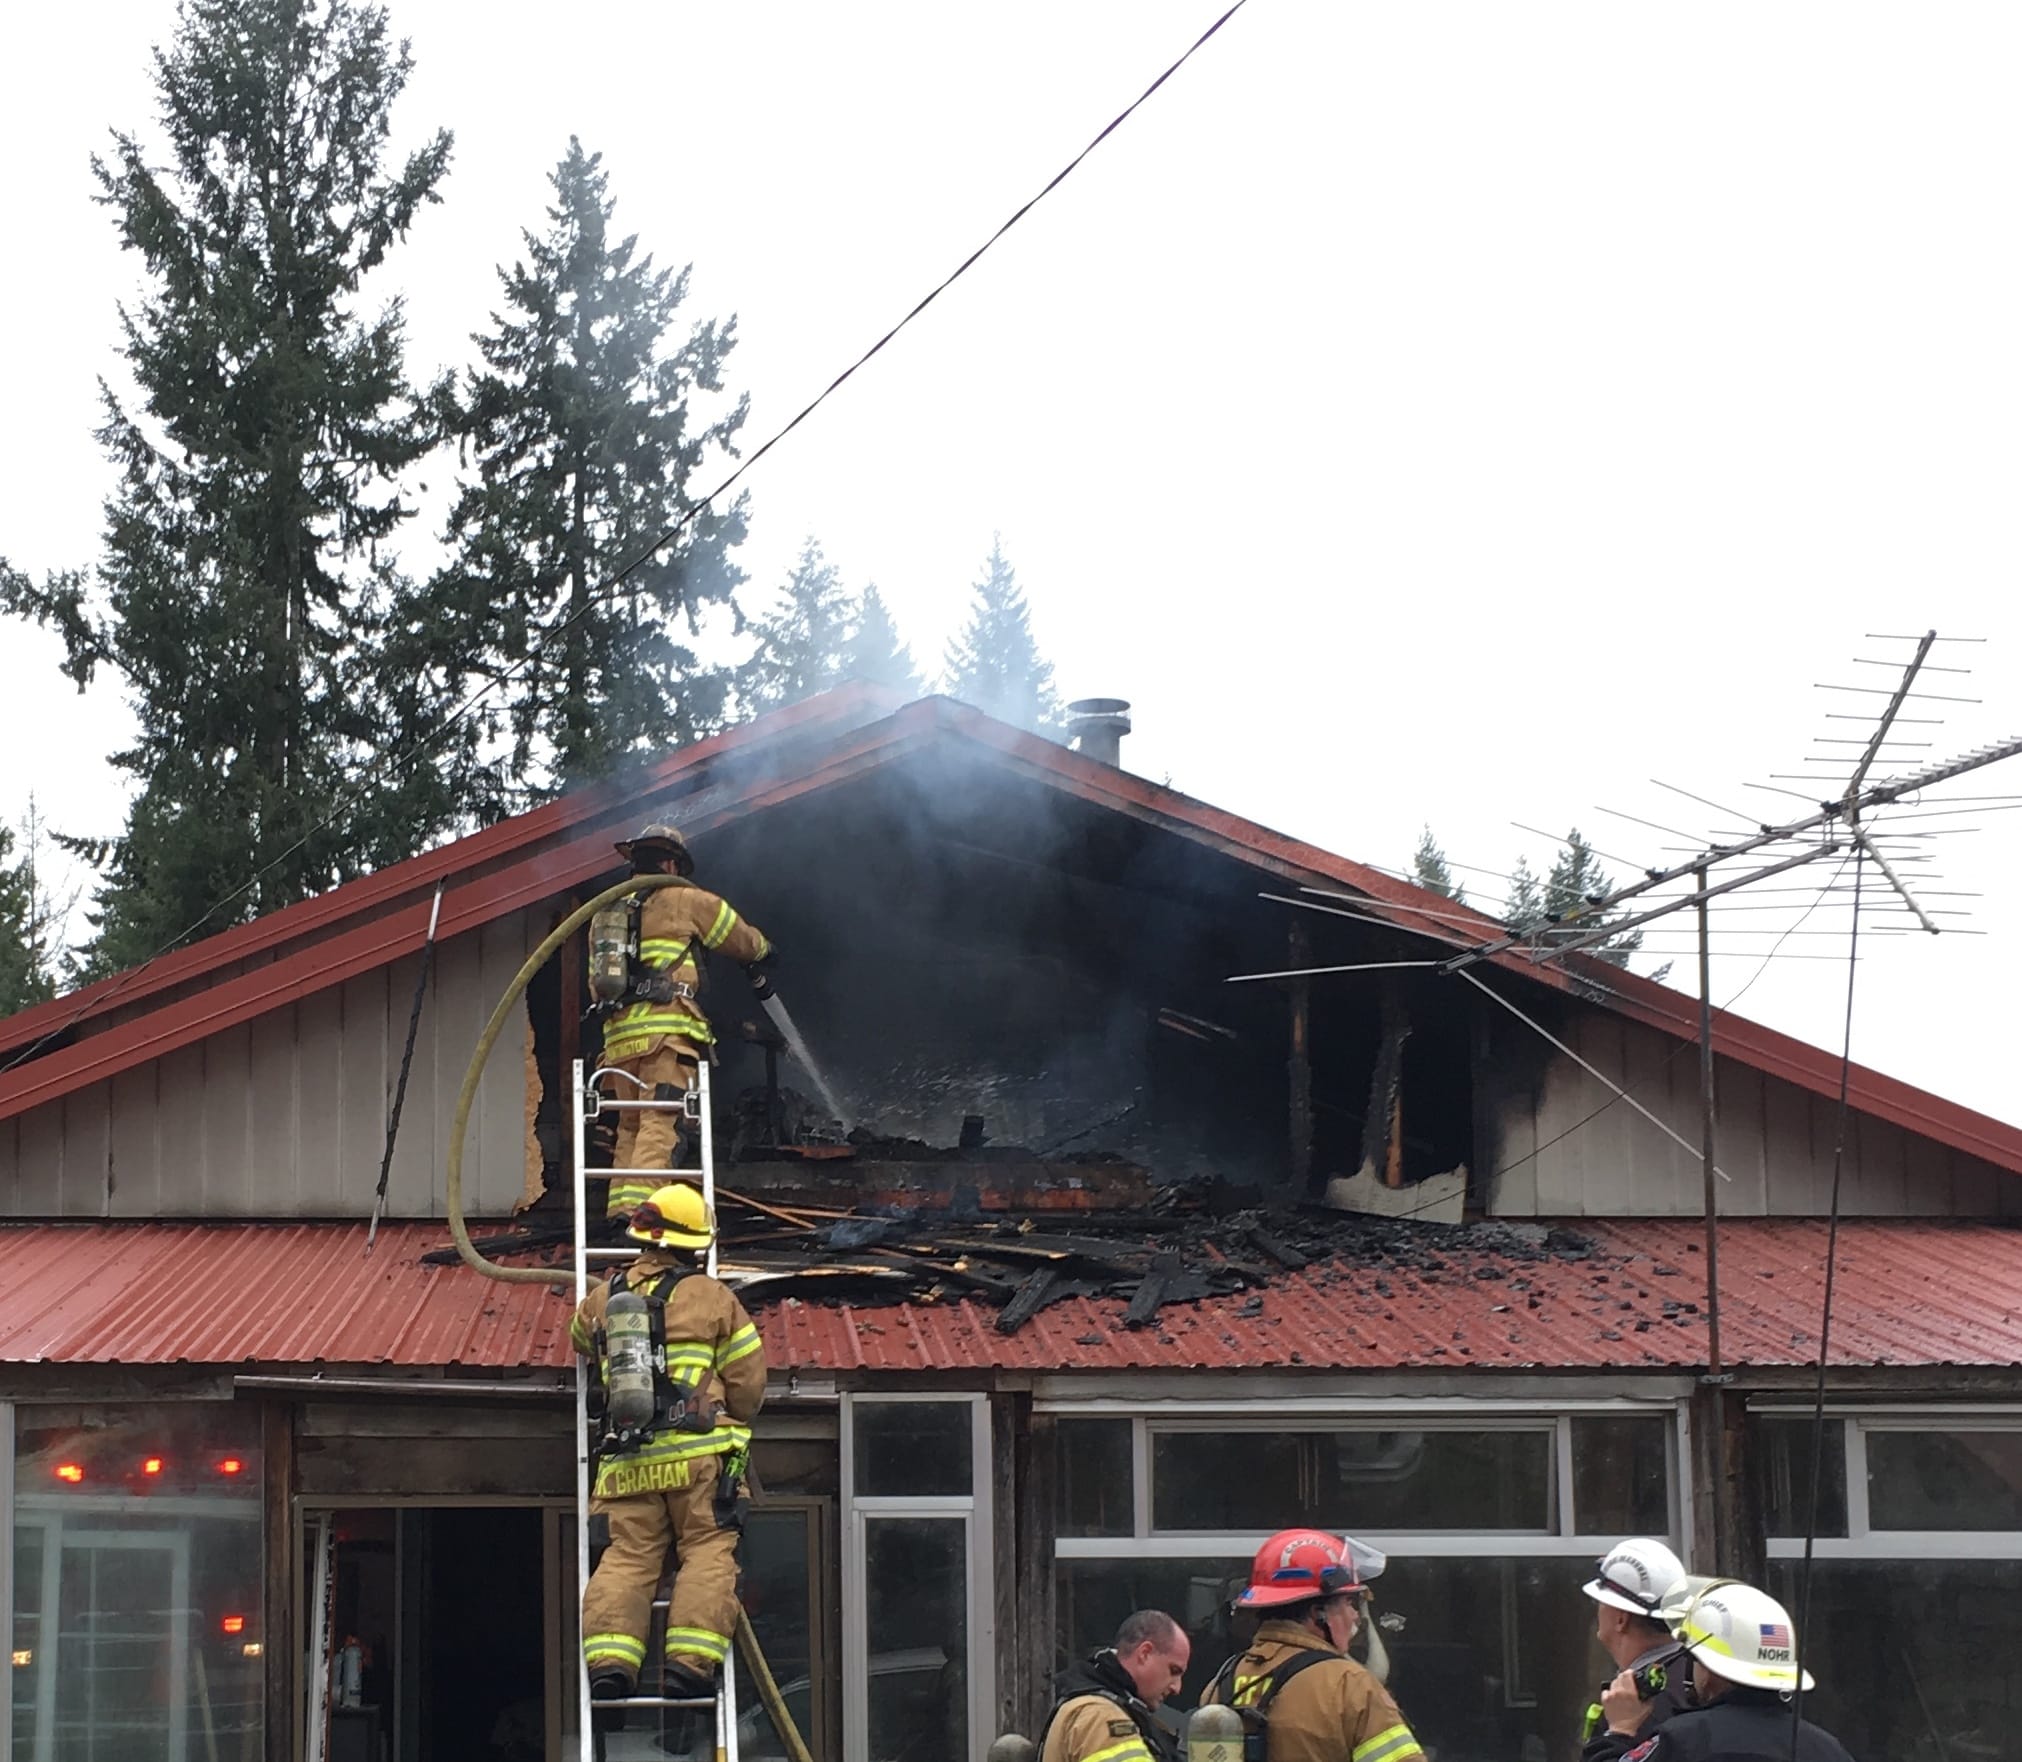 Firefighters work to quell the flames from a house fire north of Ridgefield Wednesday afternoon. No one was seriously hurt.